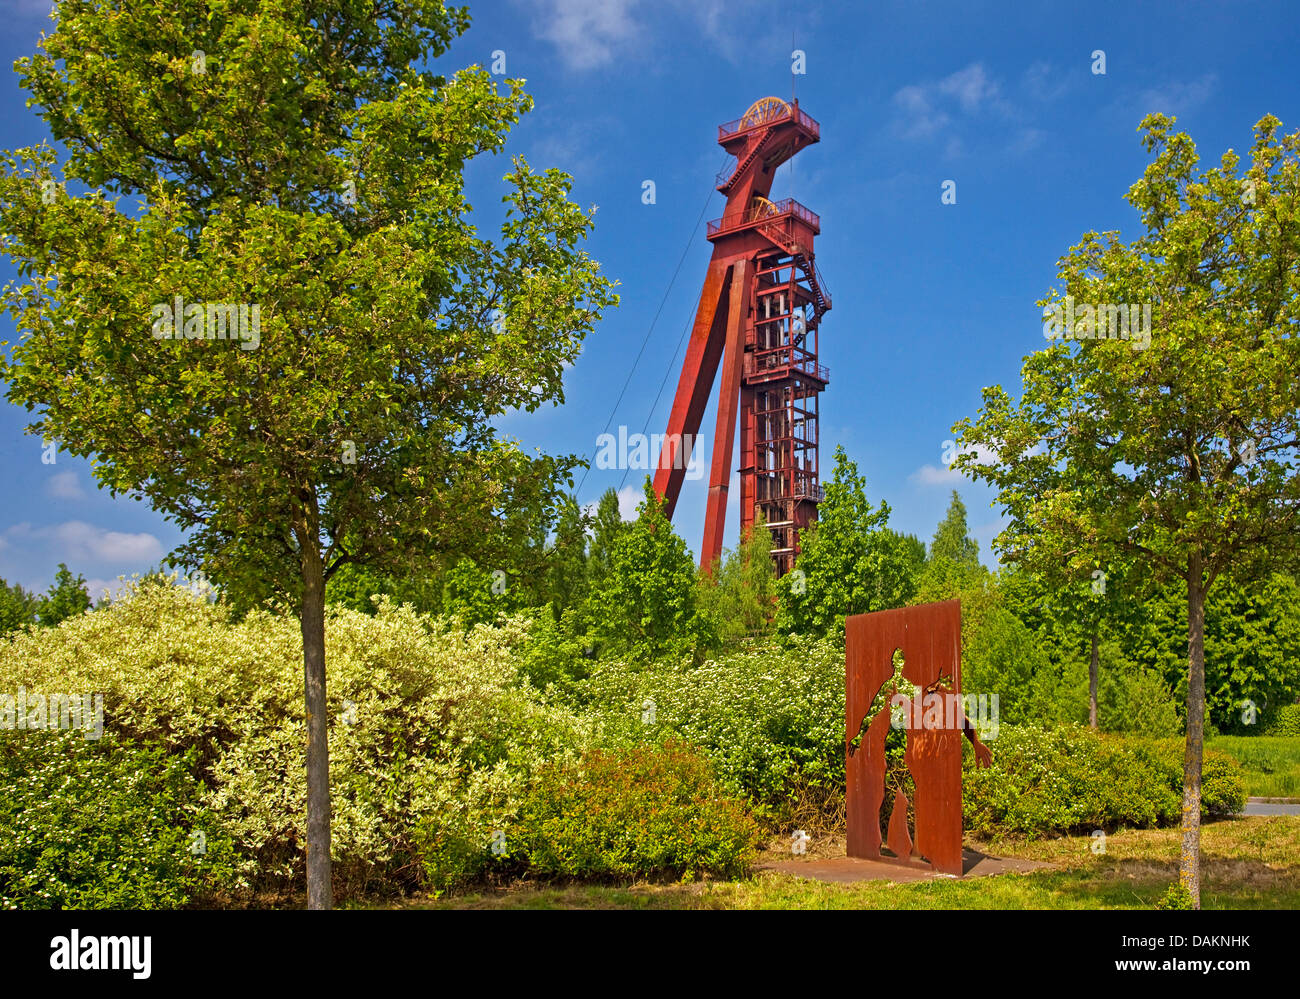 shaft tower of the shaft Grillo of the shut-down coal mine Monopol with the artwork called 'Strukturwandel' (structural transformation') in the foreground, Germany, North Rhine-Westphalia, Ruhr Area, Kamen Stock Photo